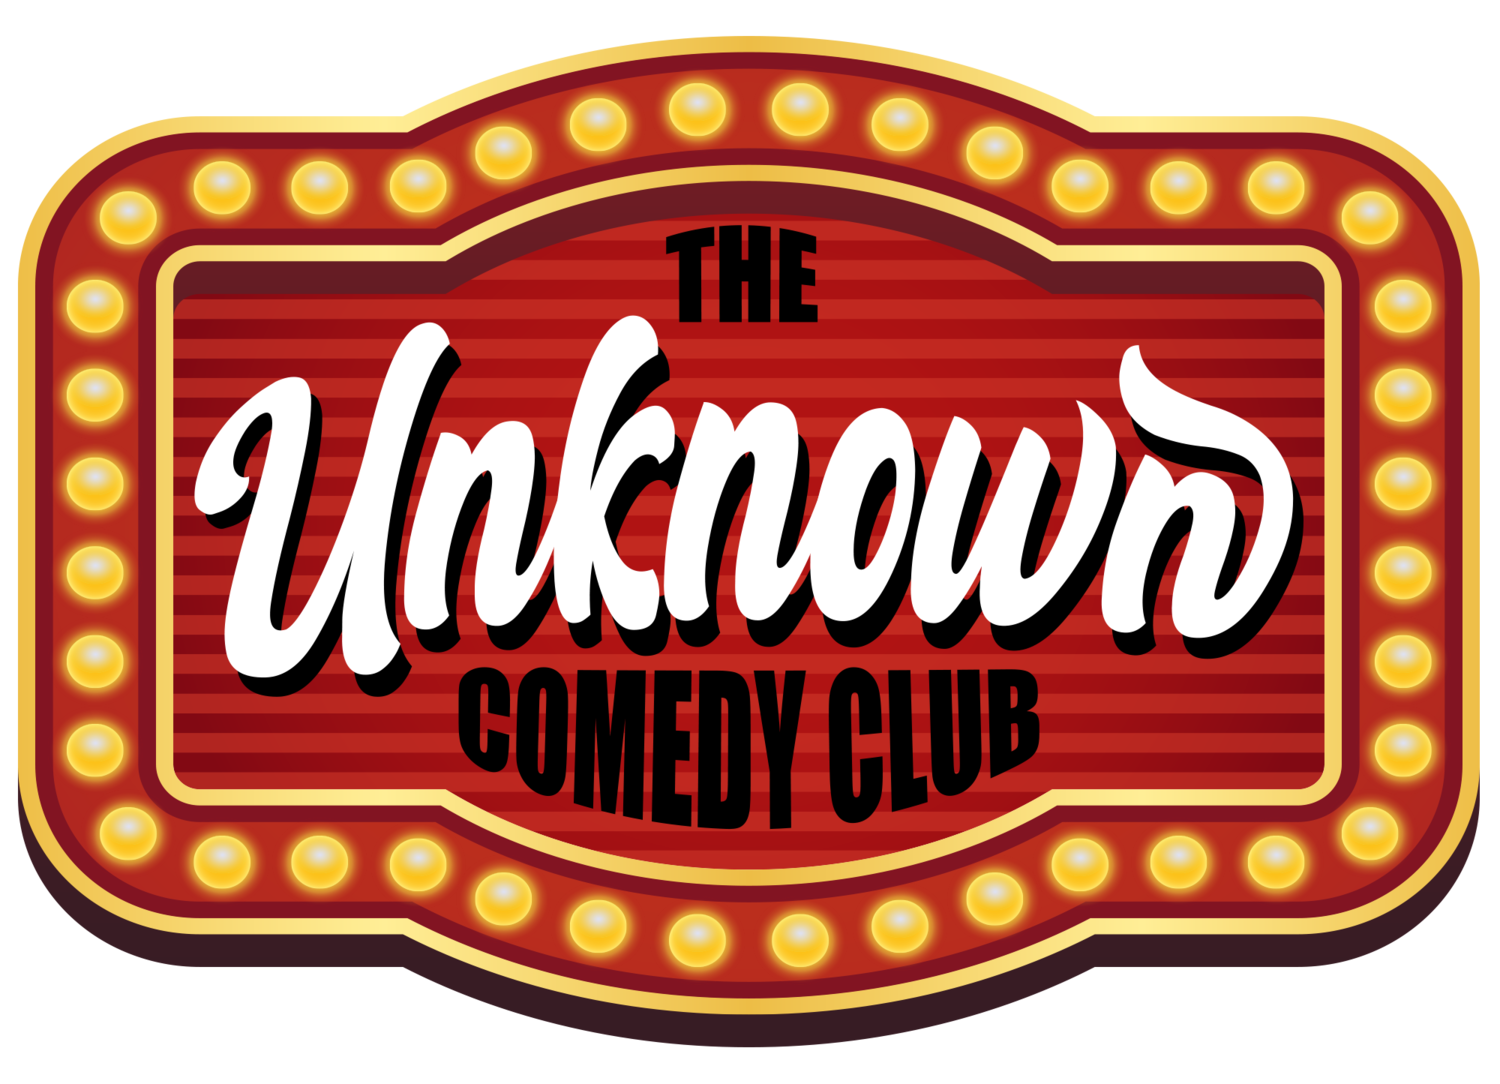 Stand Up Club Show Logo Design With Microphone And Text Vector Set Royalty  Free SVG, Cliparts, Vectors, and Stock Illustration. Image 195477599.